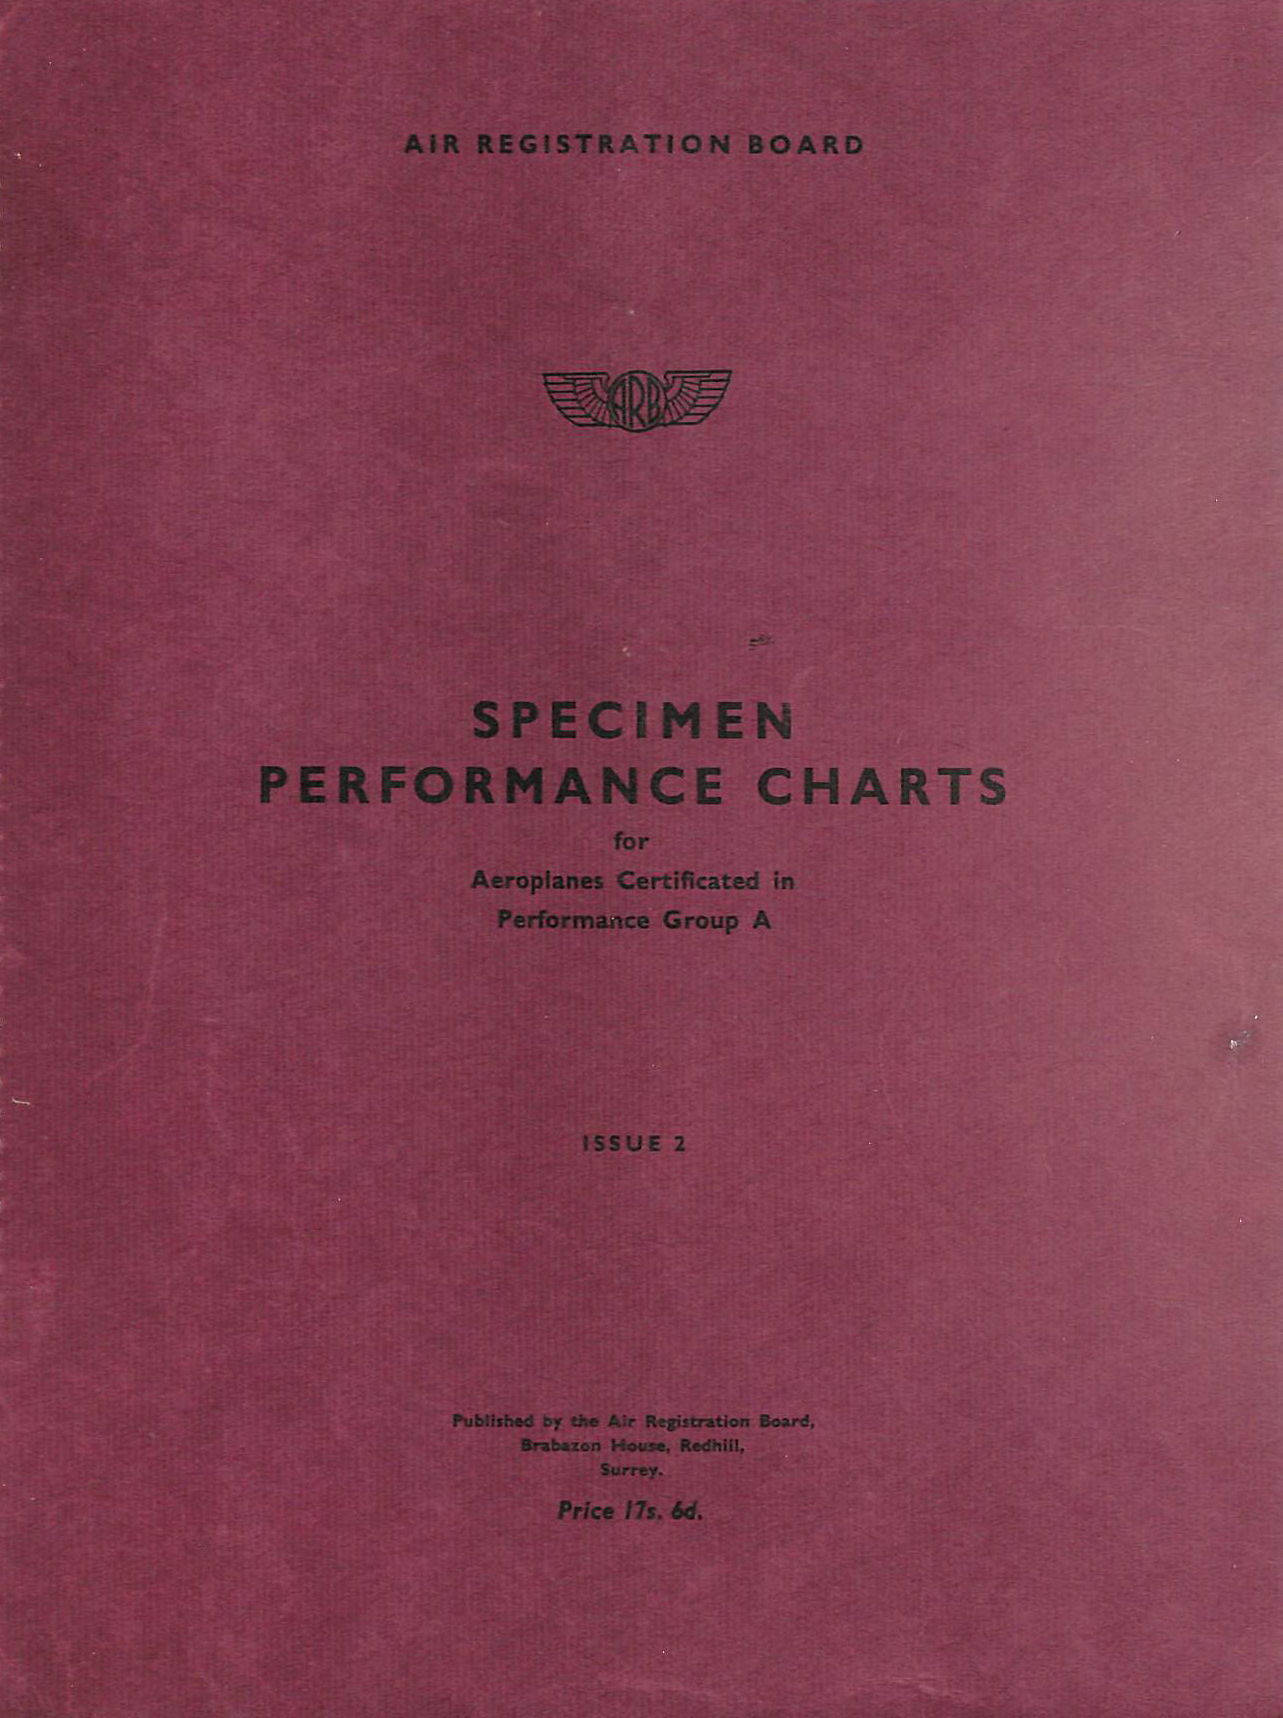 ANON - ARB - AIR REGISTRATION BOARD. Specimen Performance Charts for Aeroplanes Certificated in Performance Group A. ISSUE 2. 1st December 1959.